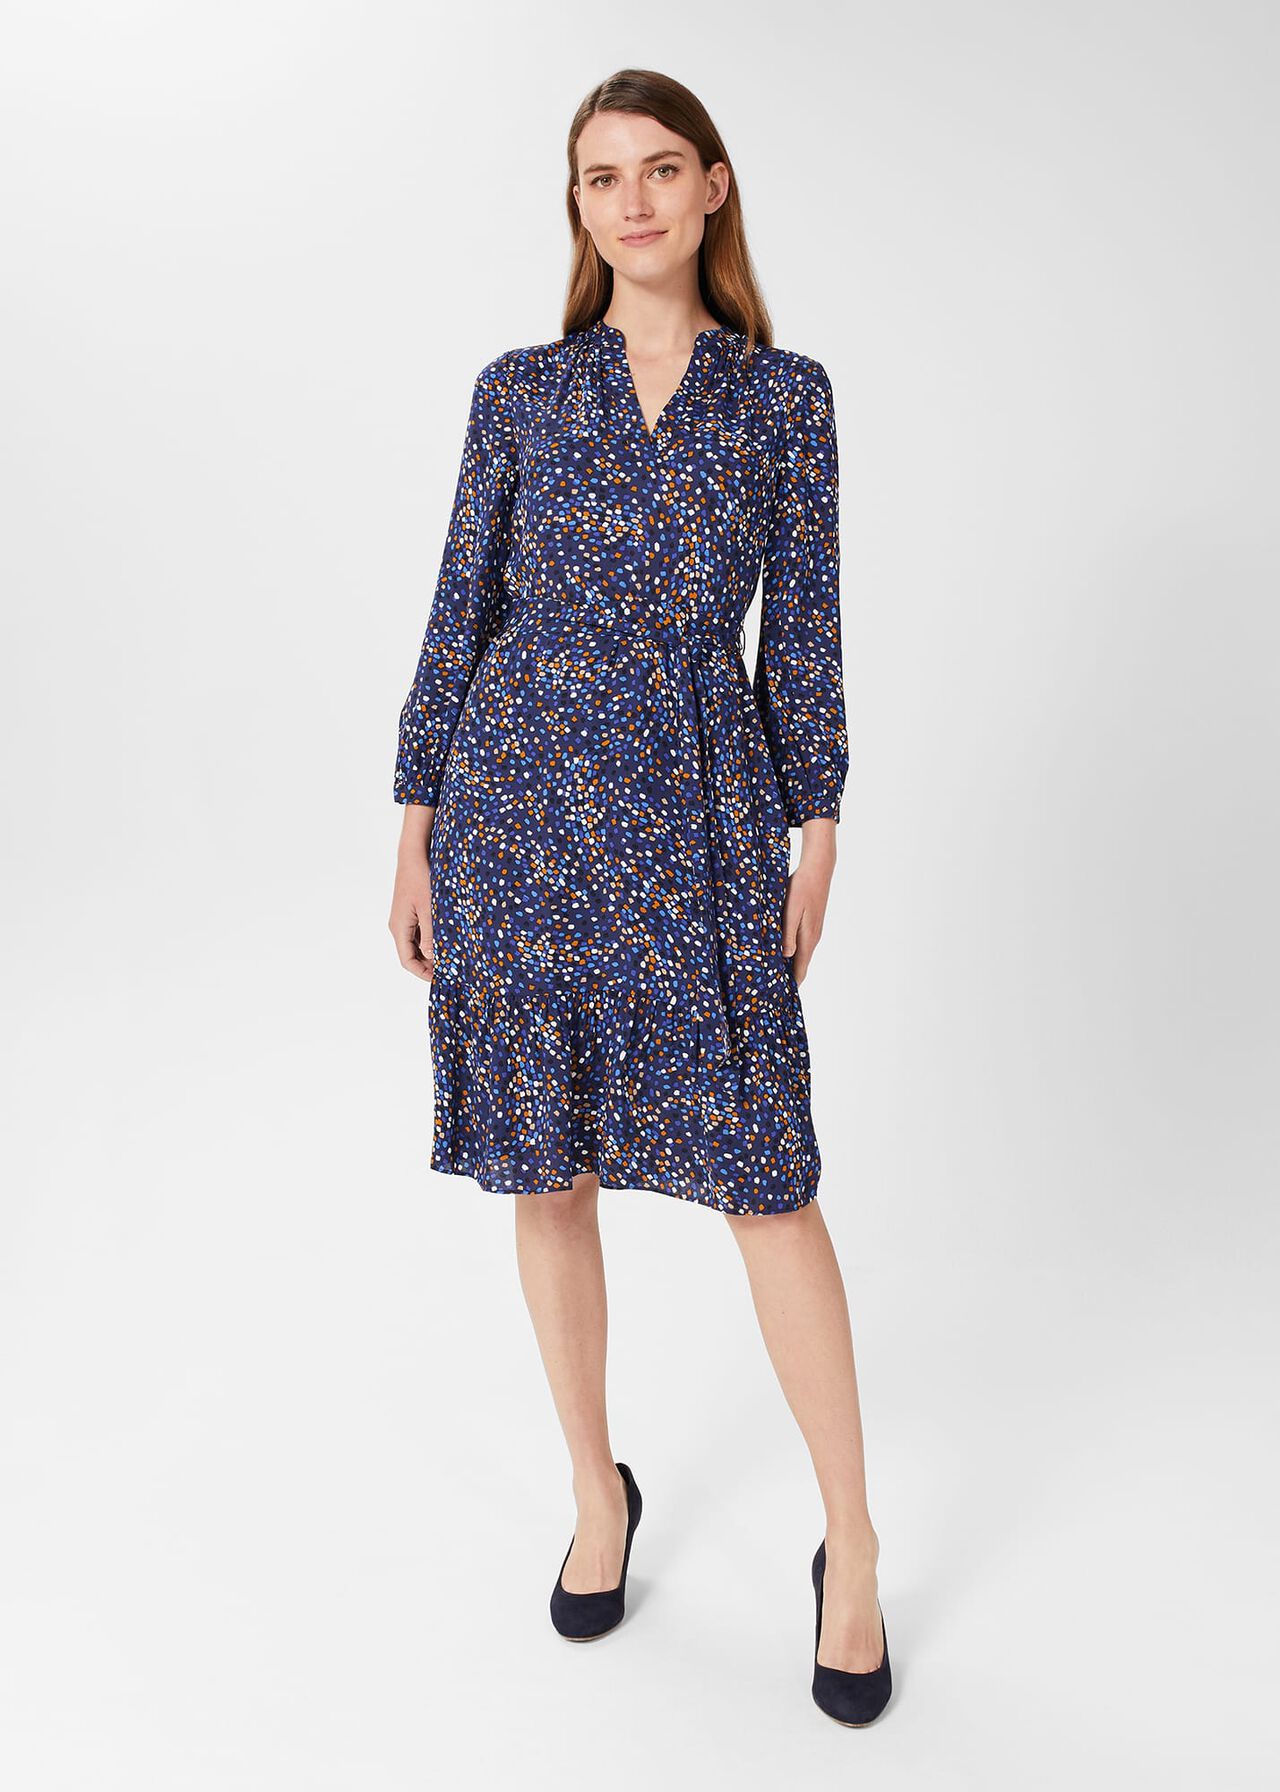 Mallory Belted Fit And Flare Dress, Blue Multi, hi-res